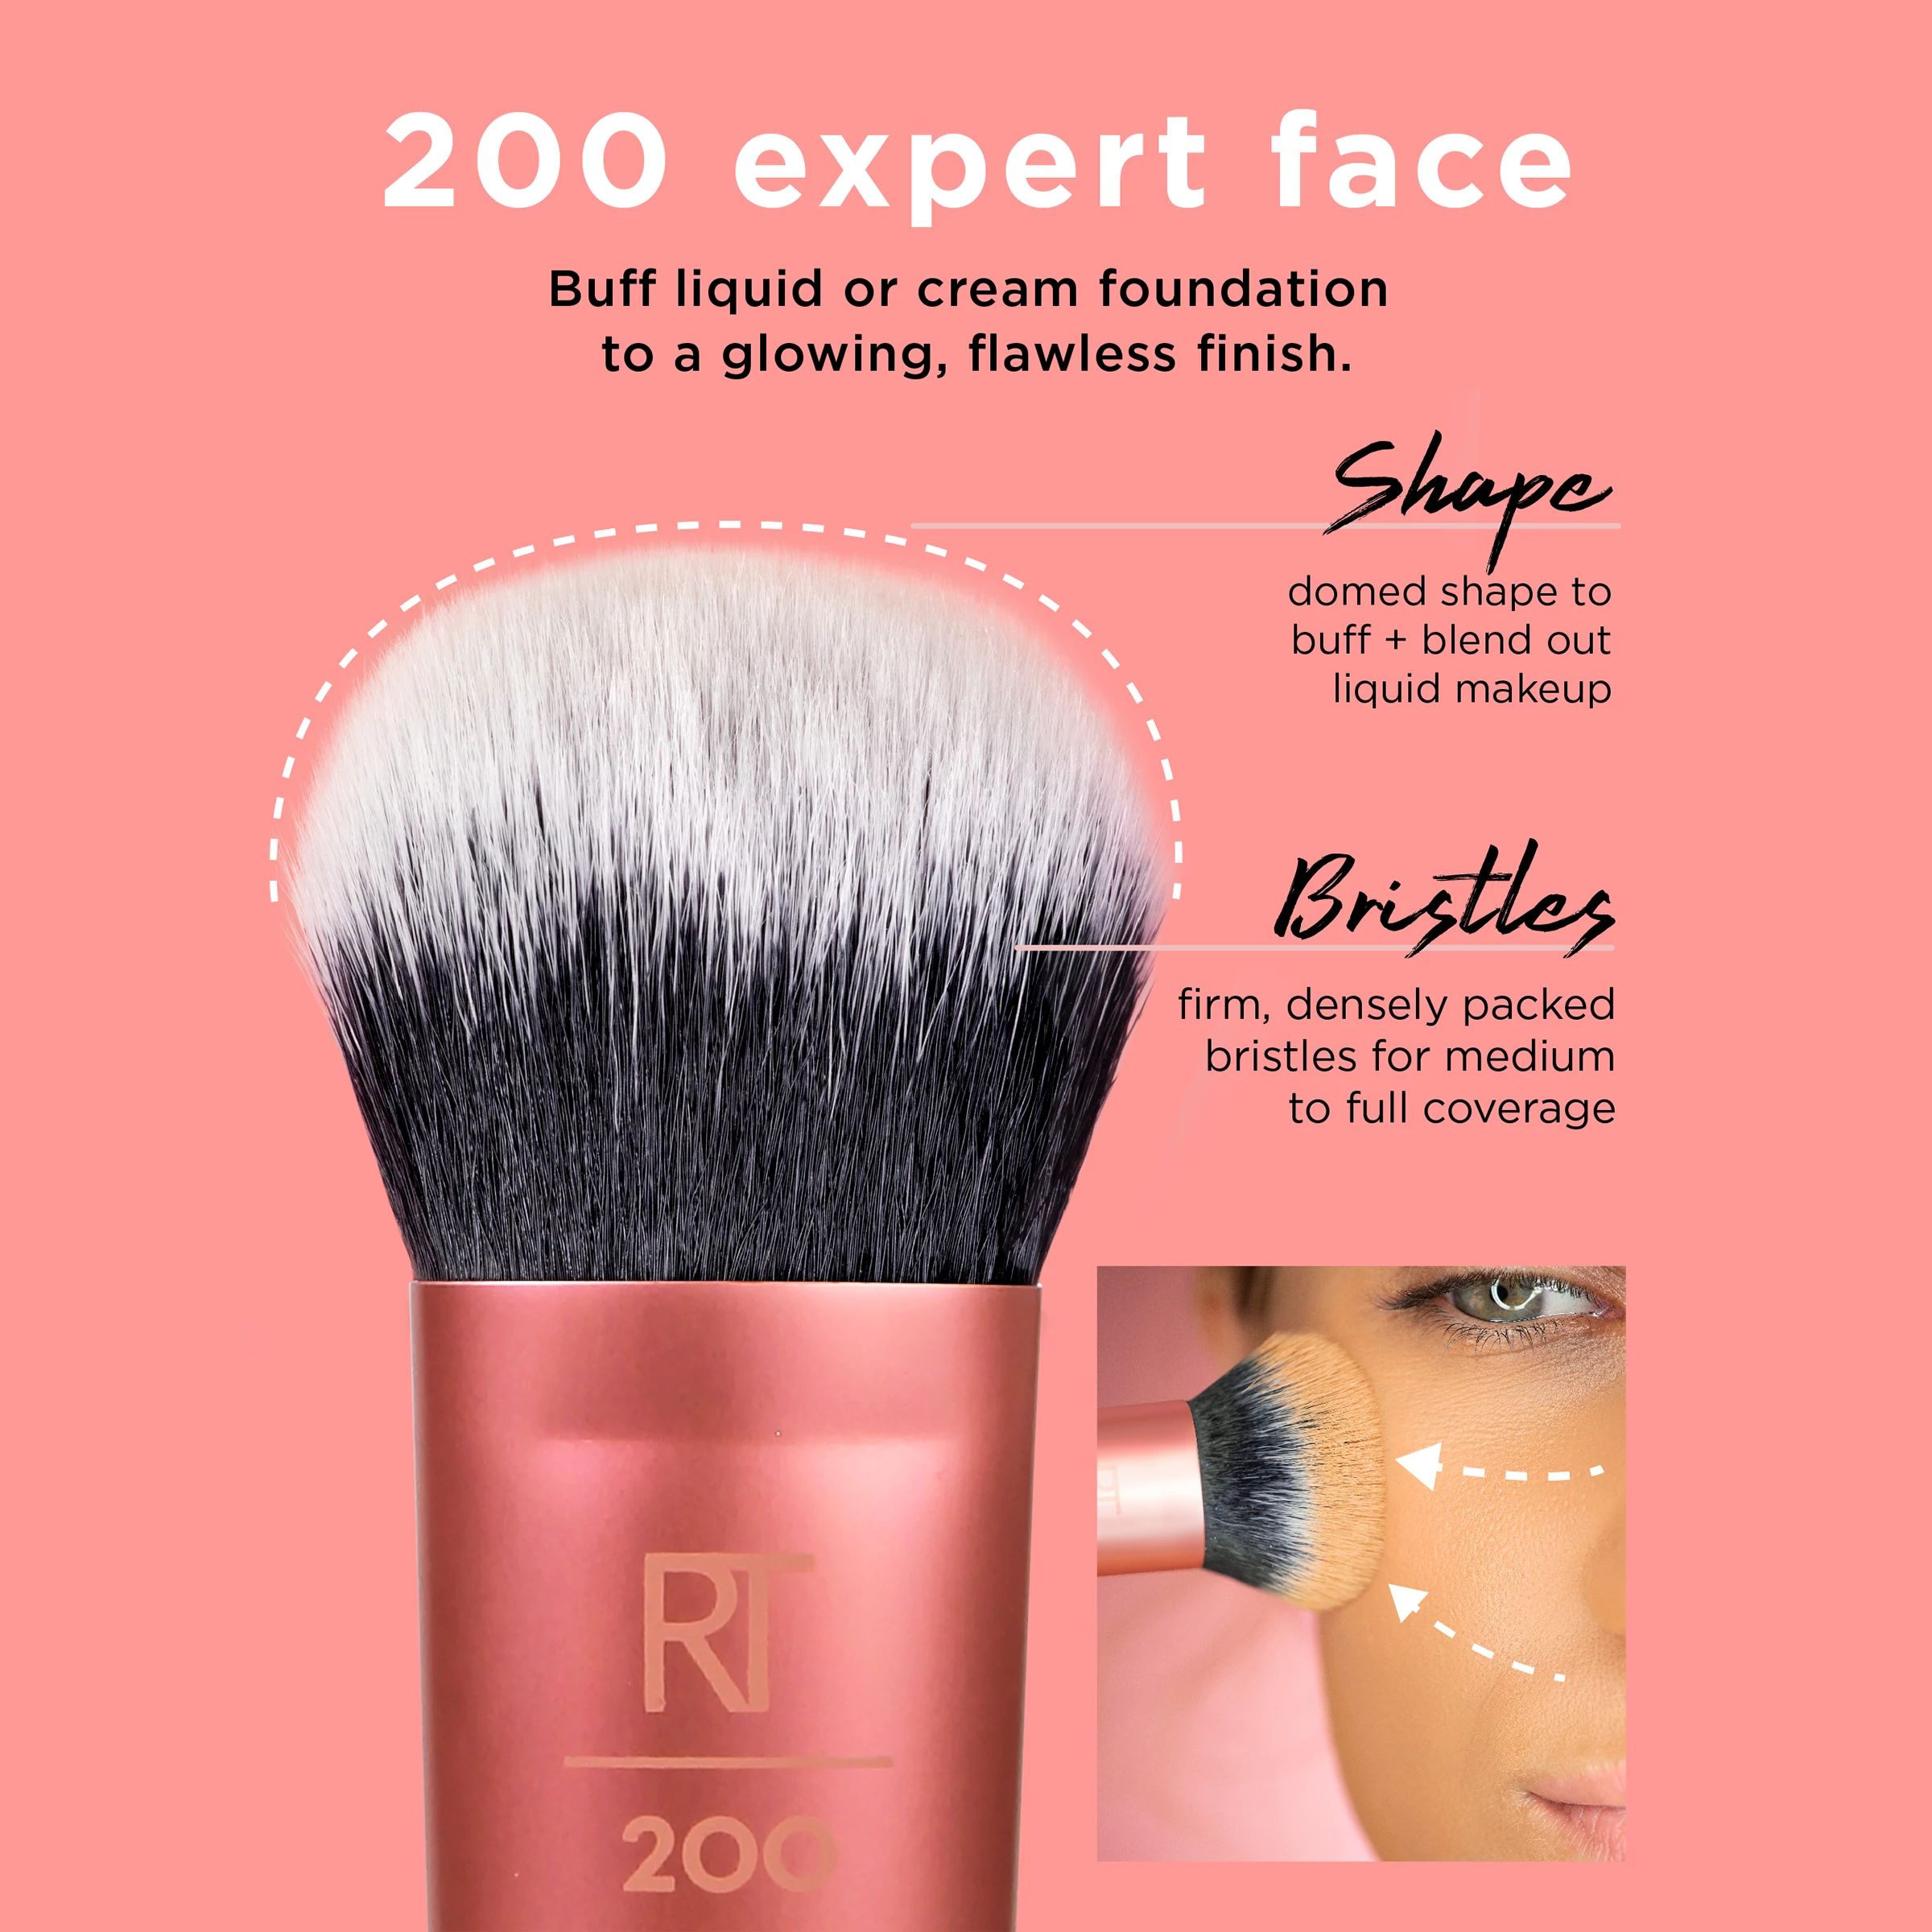 Real Techniques Expert Face Makeup Brush, Foundation Blending Brush, 1 Count - image 4 of 11